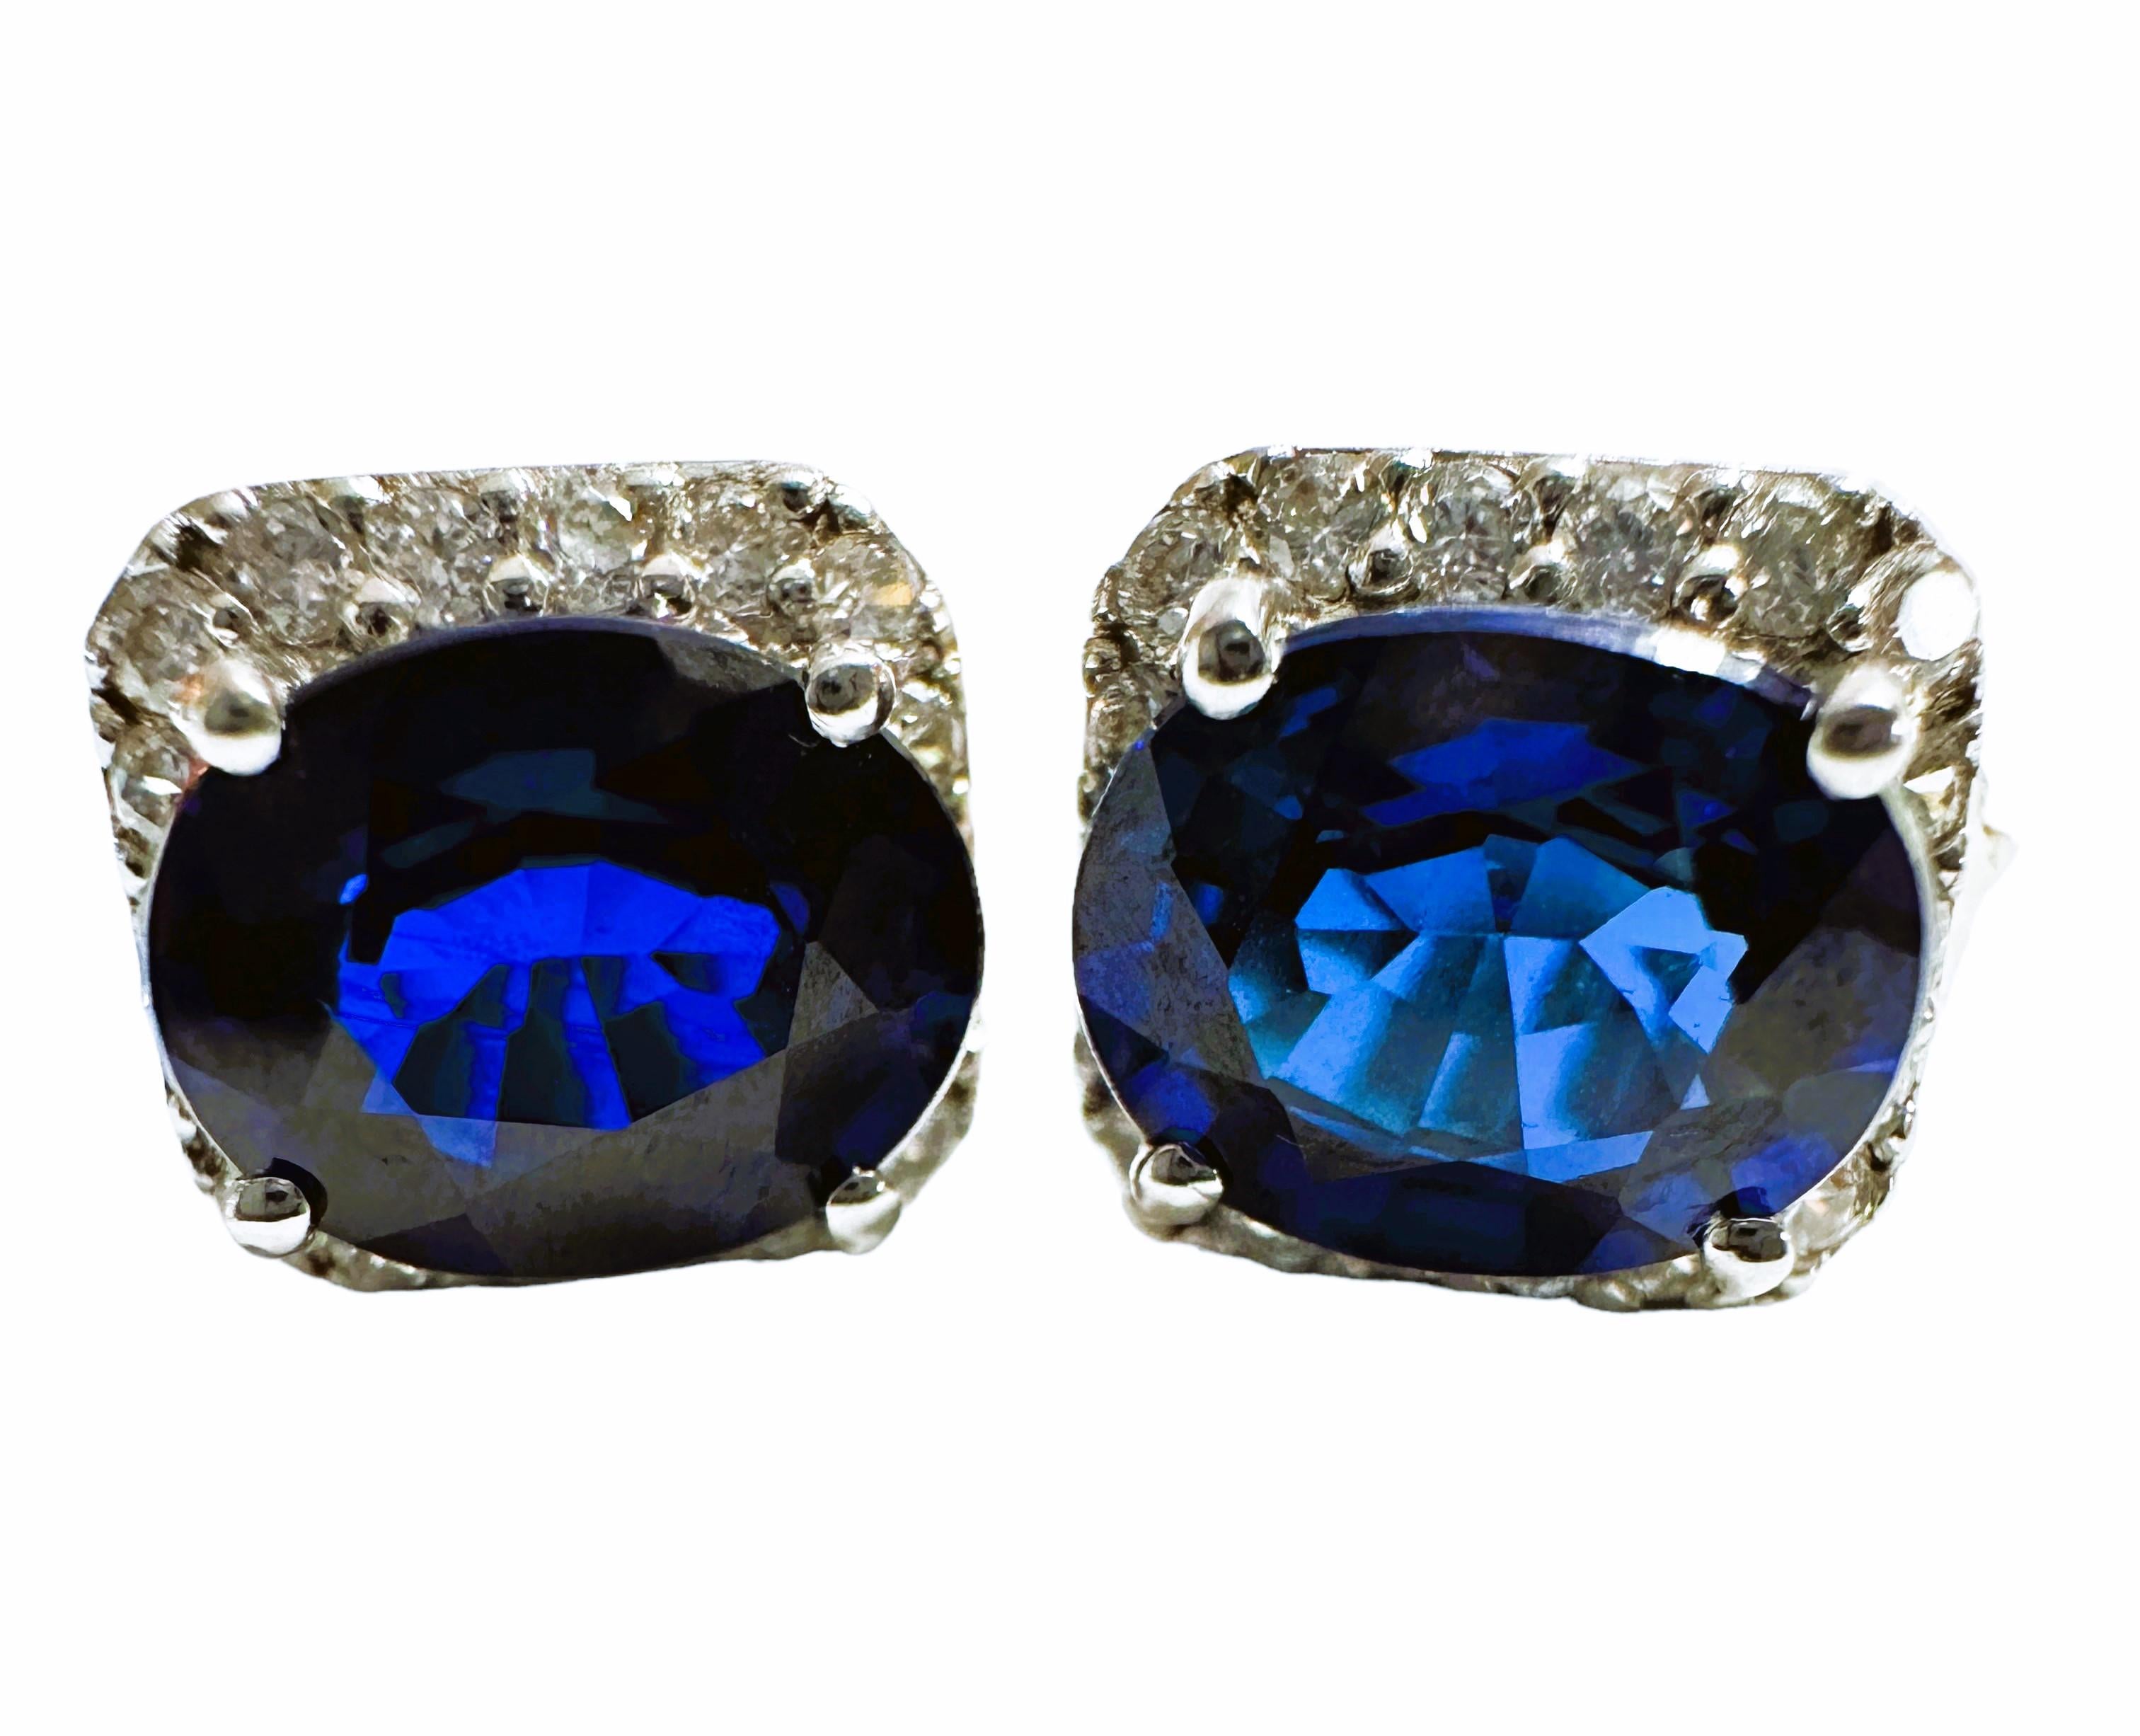  New African 4.10 ct Deep Blue Sapphire Sterling Post Earrings Pour femmes 